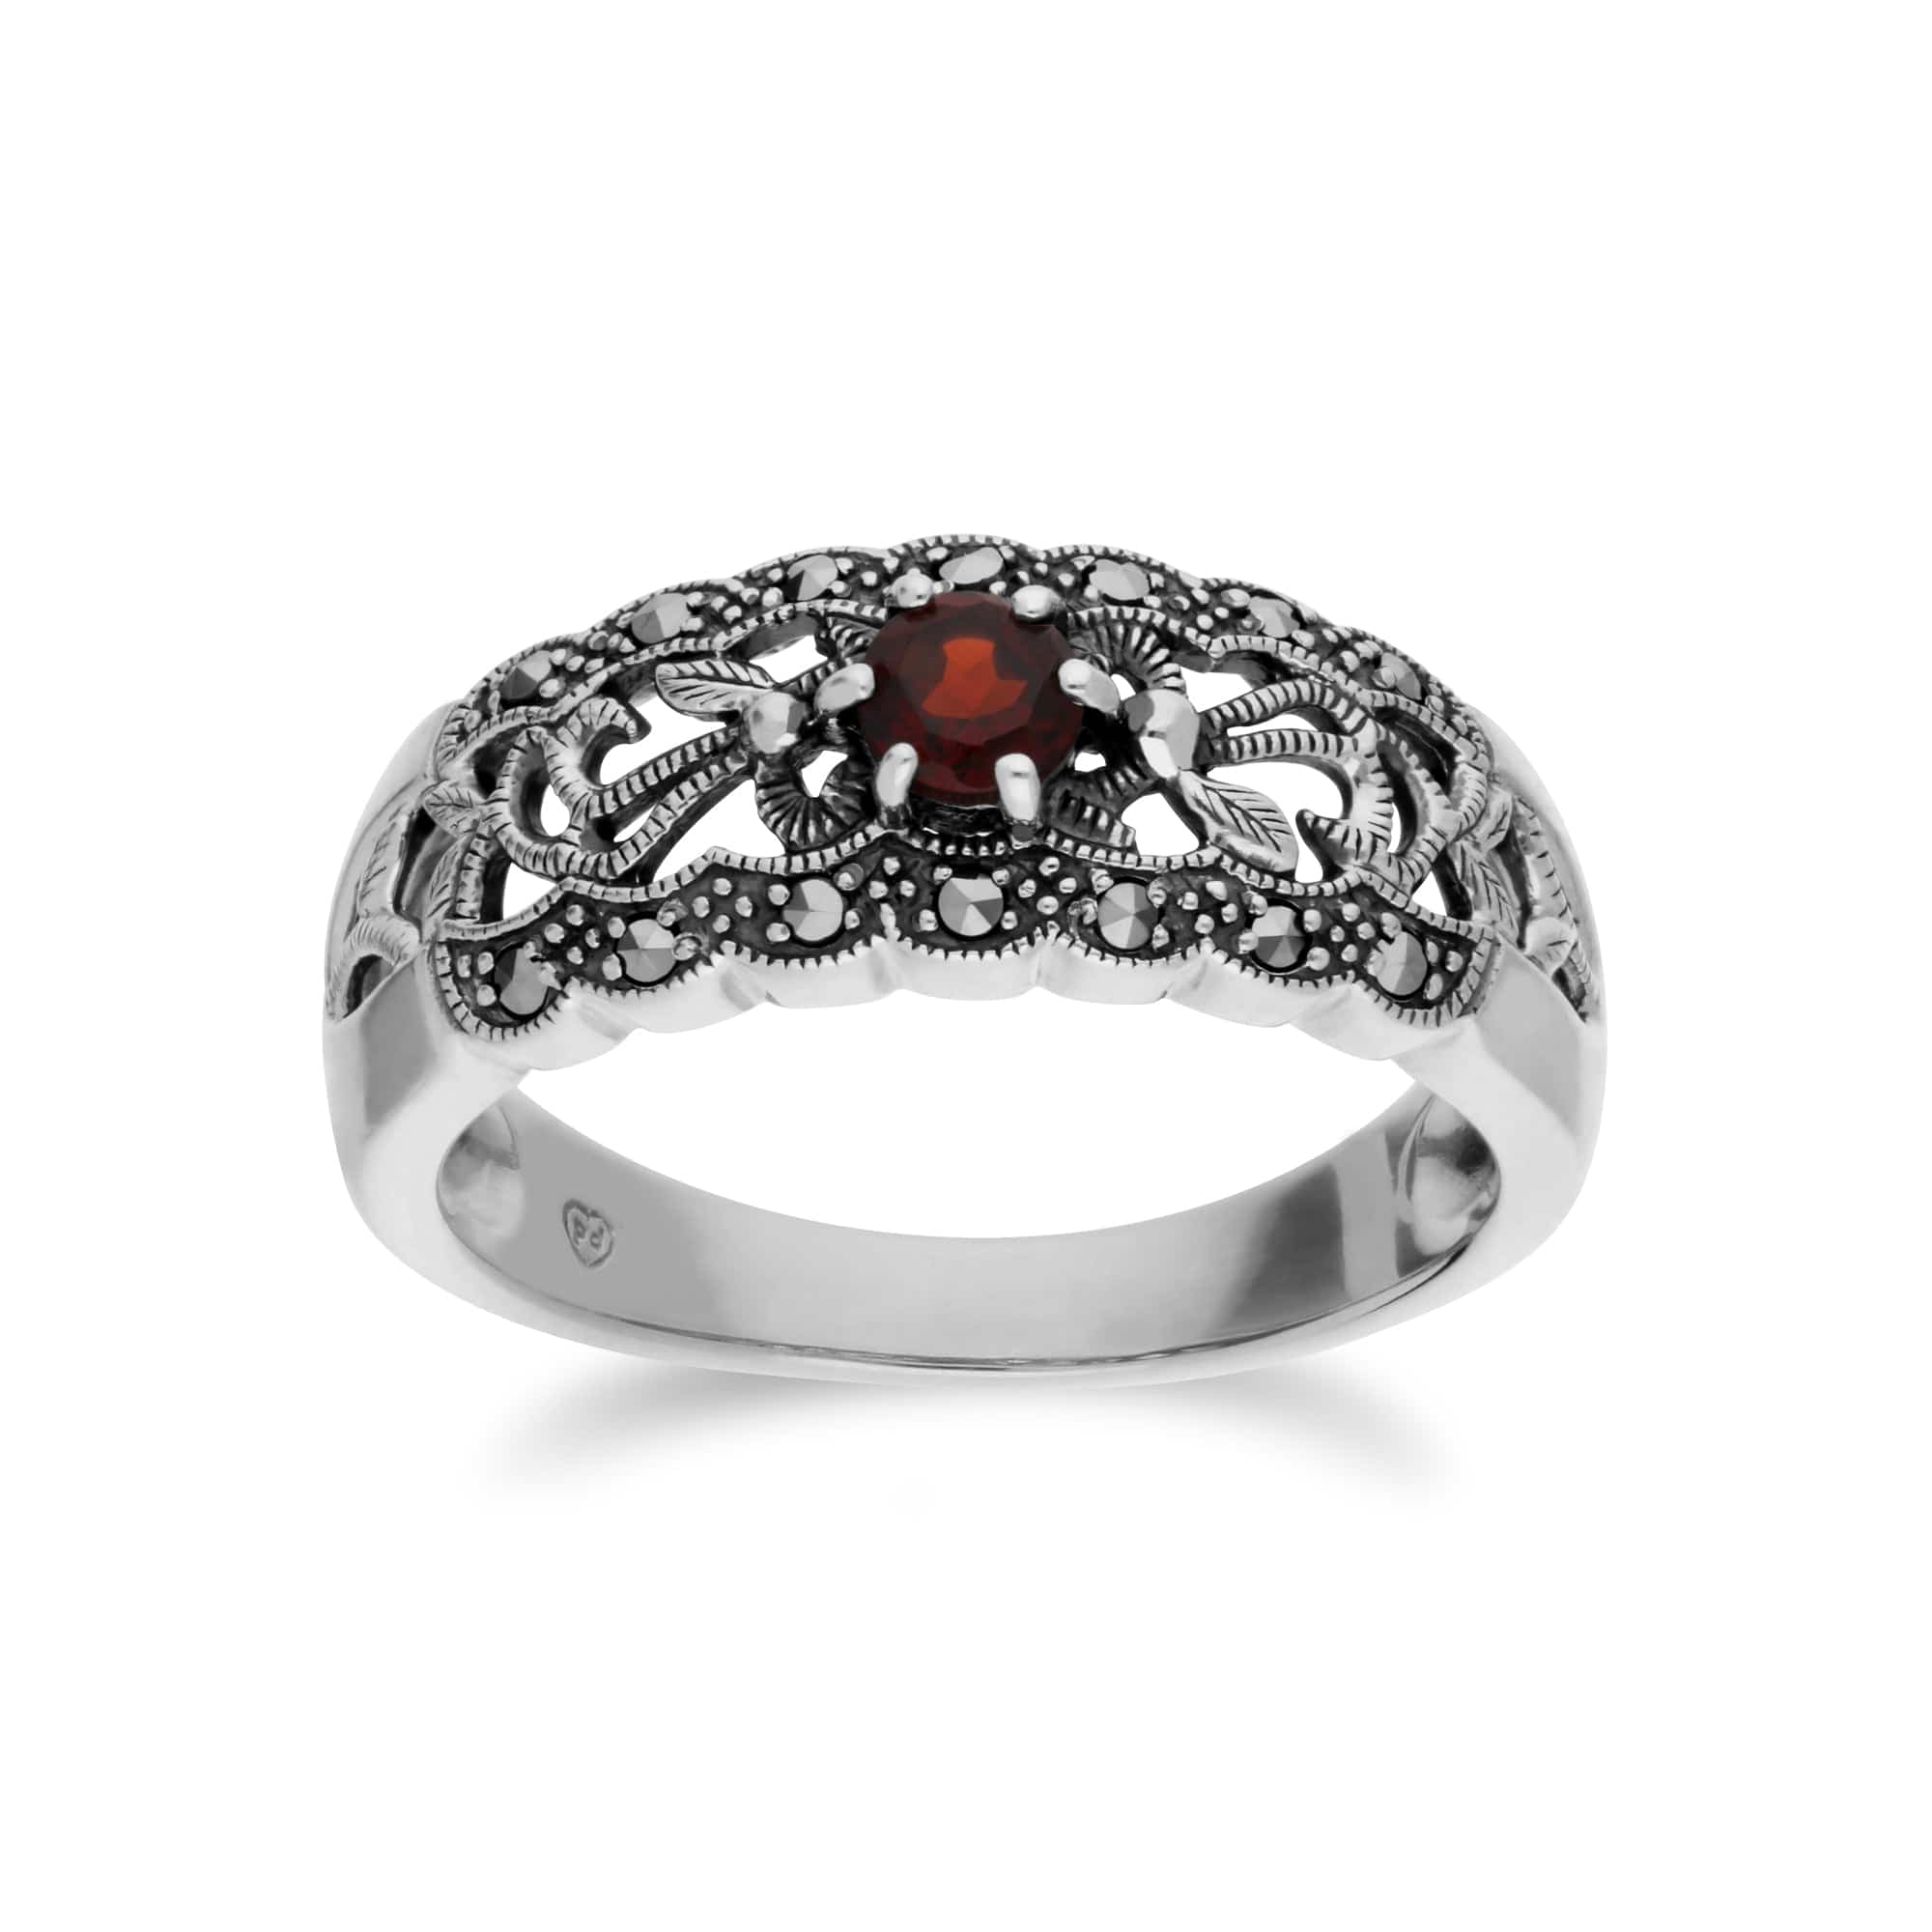 214R597707925 Art Nouveau Style Round Garnet & Marcasite Floral Band Ring in 925 Sterling Silver 1